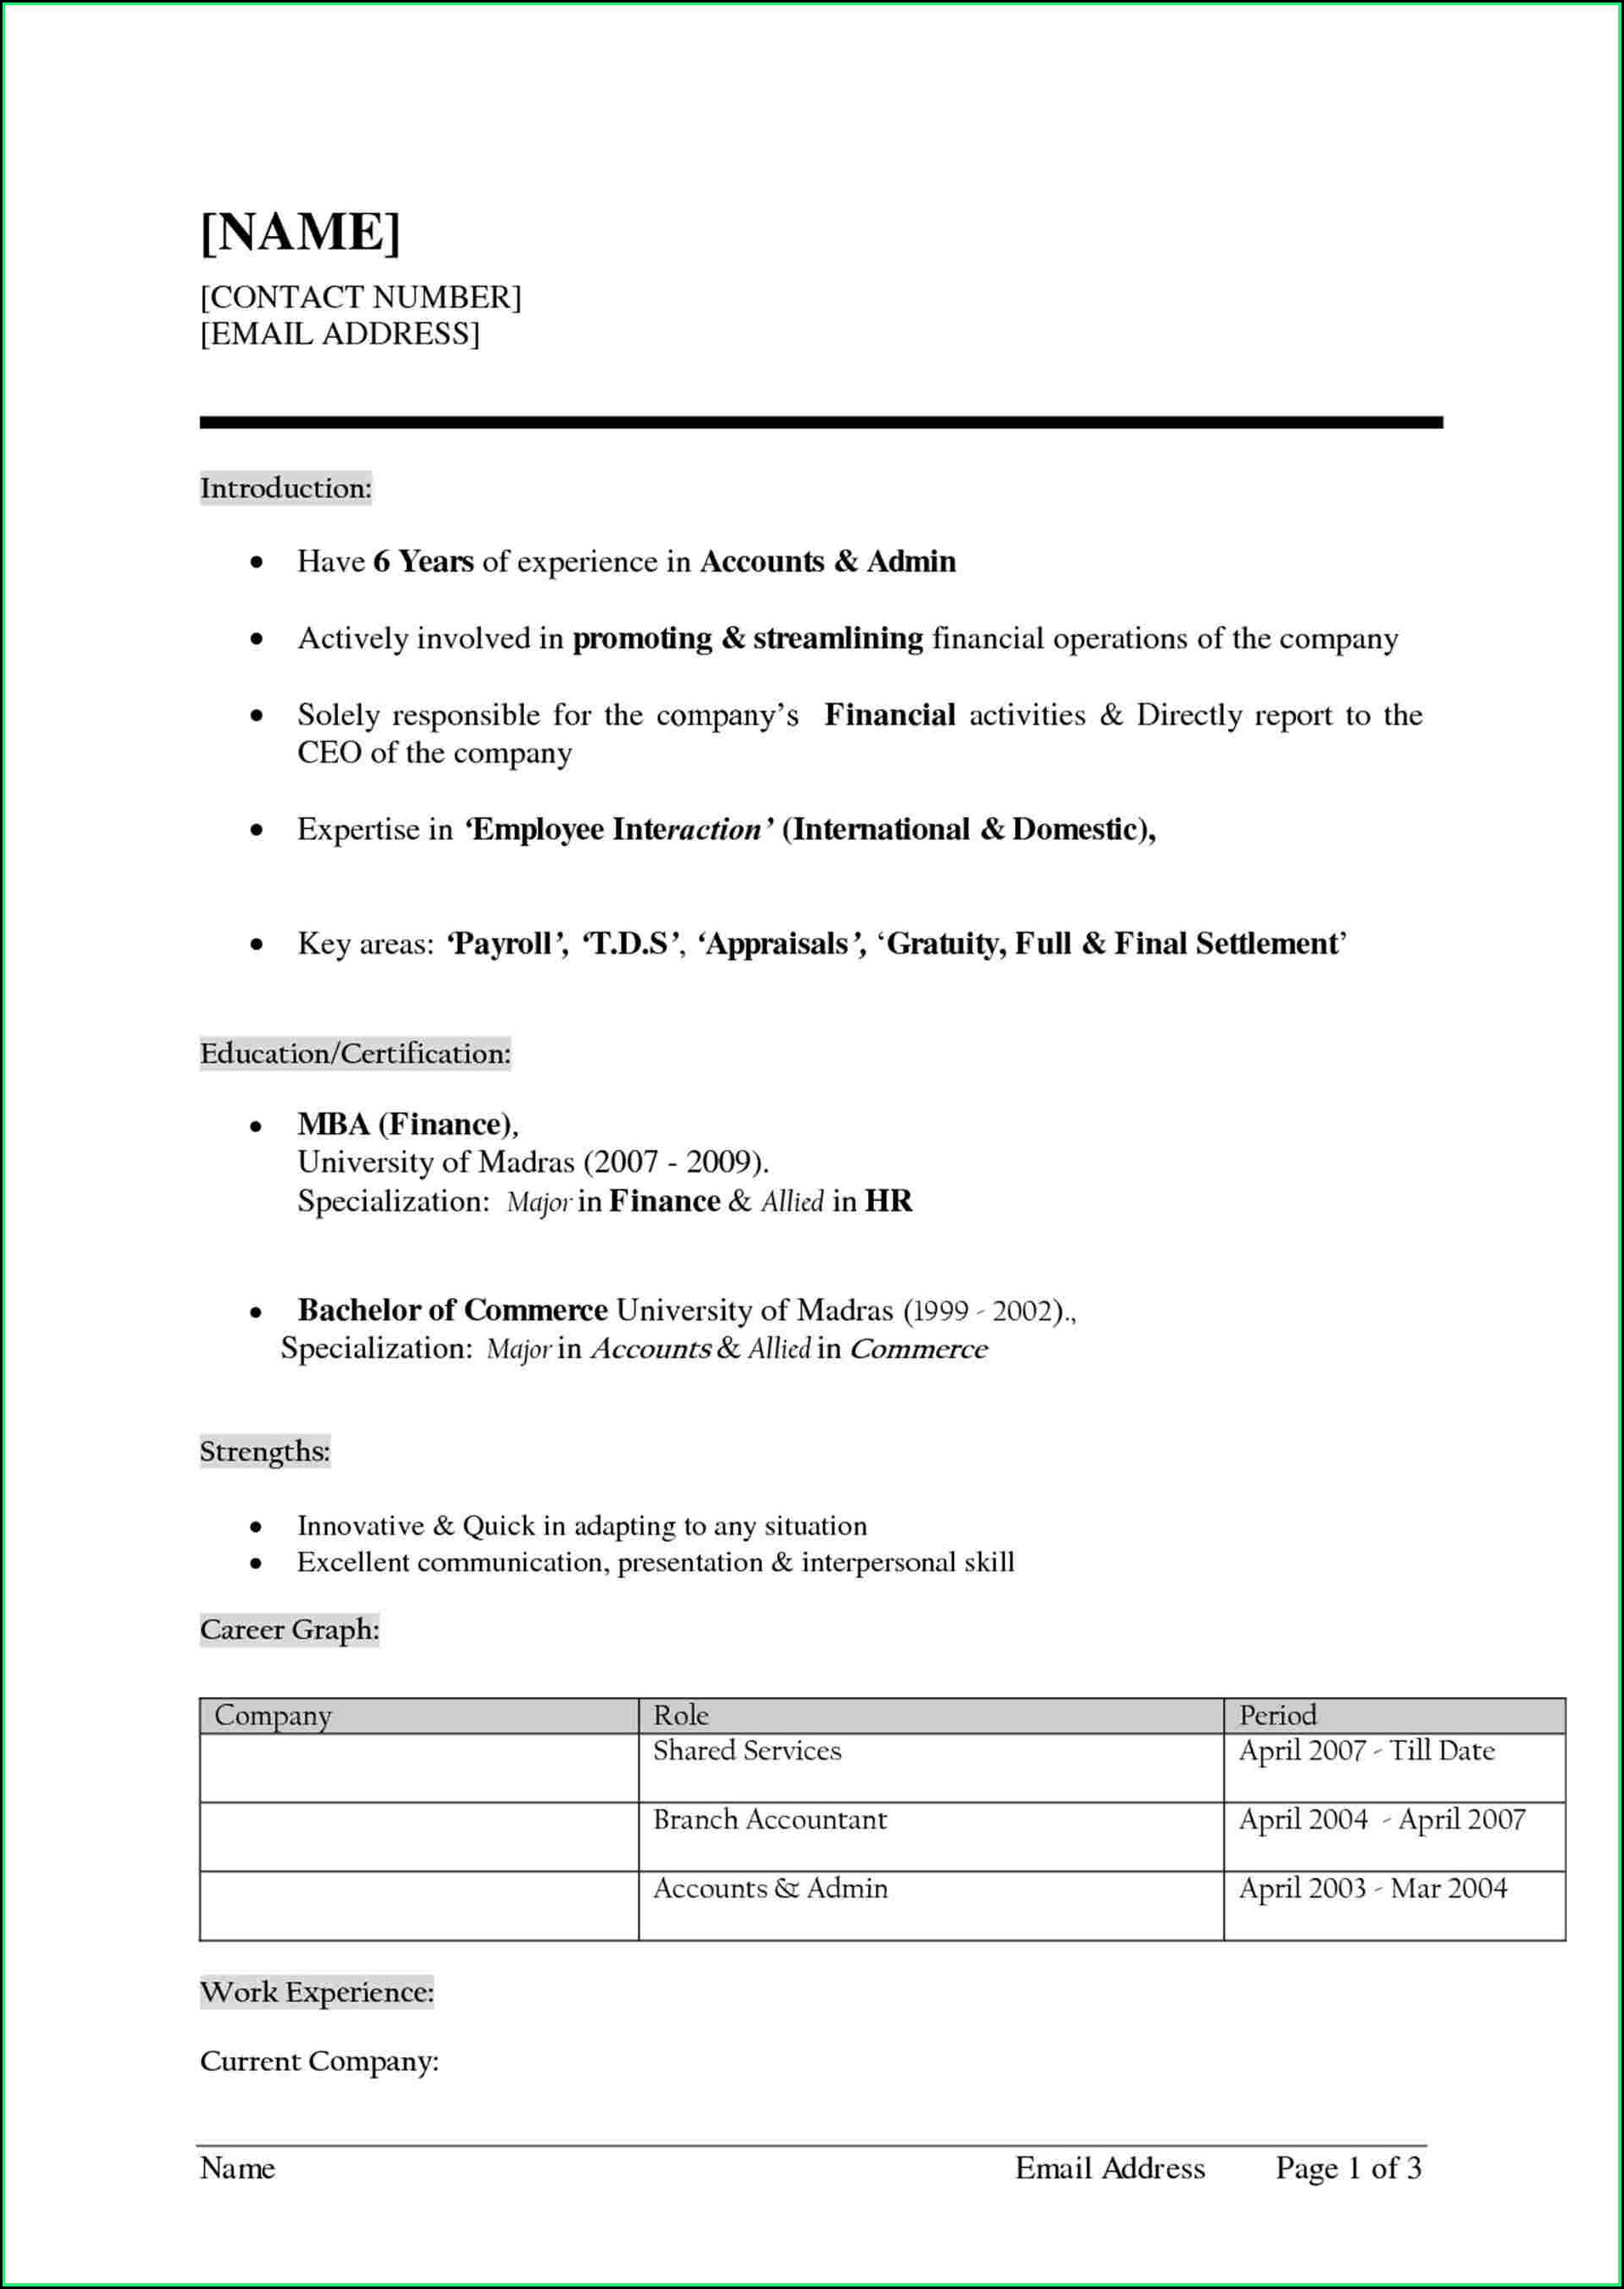 Attractive Resume Templates Free Download For Freshers